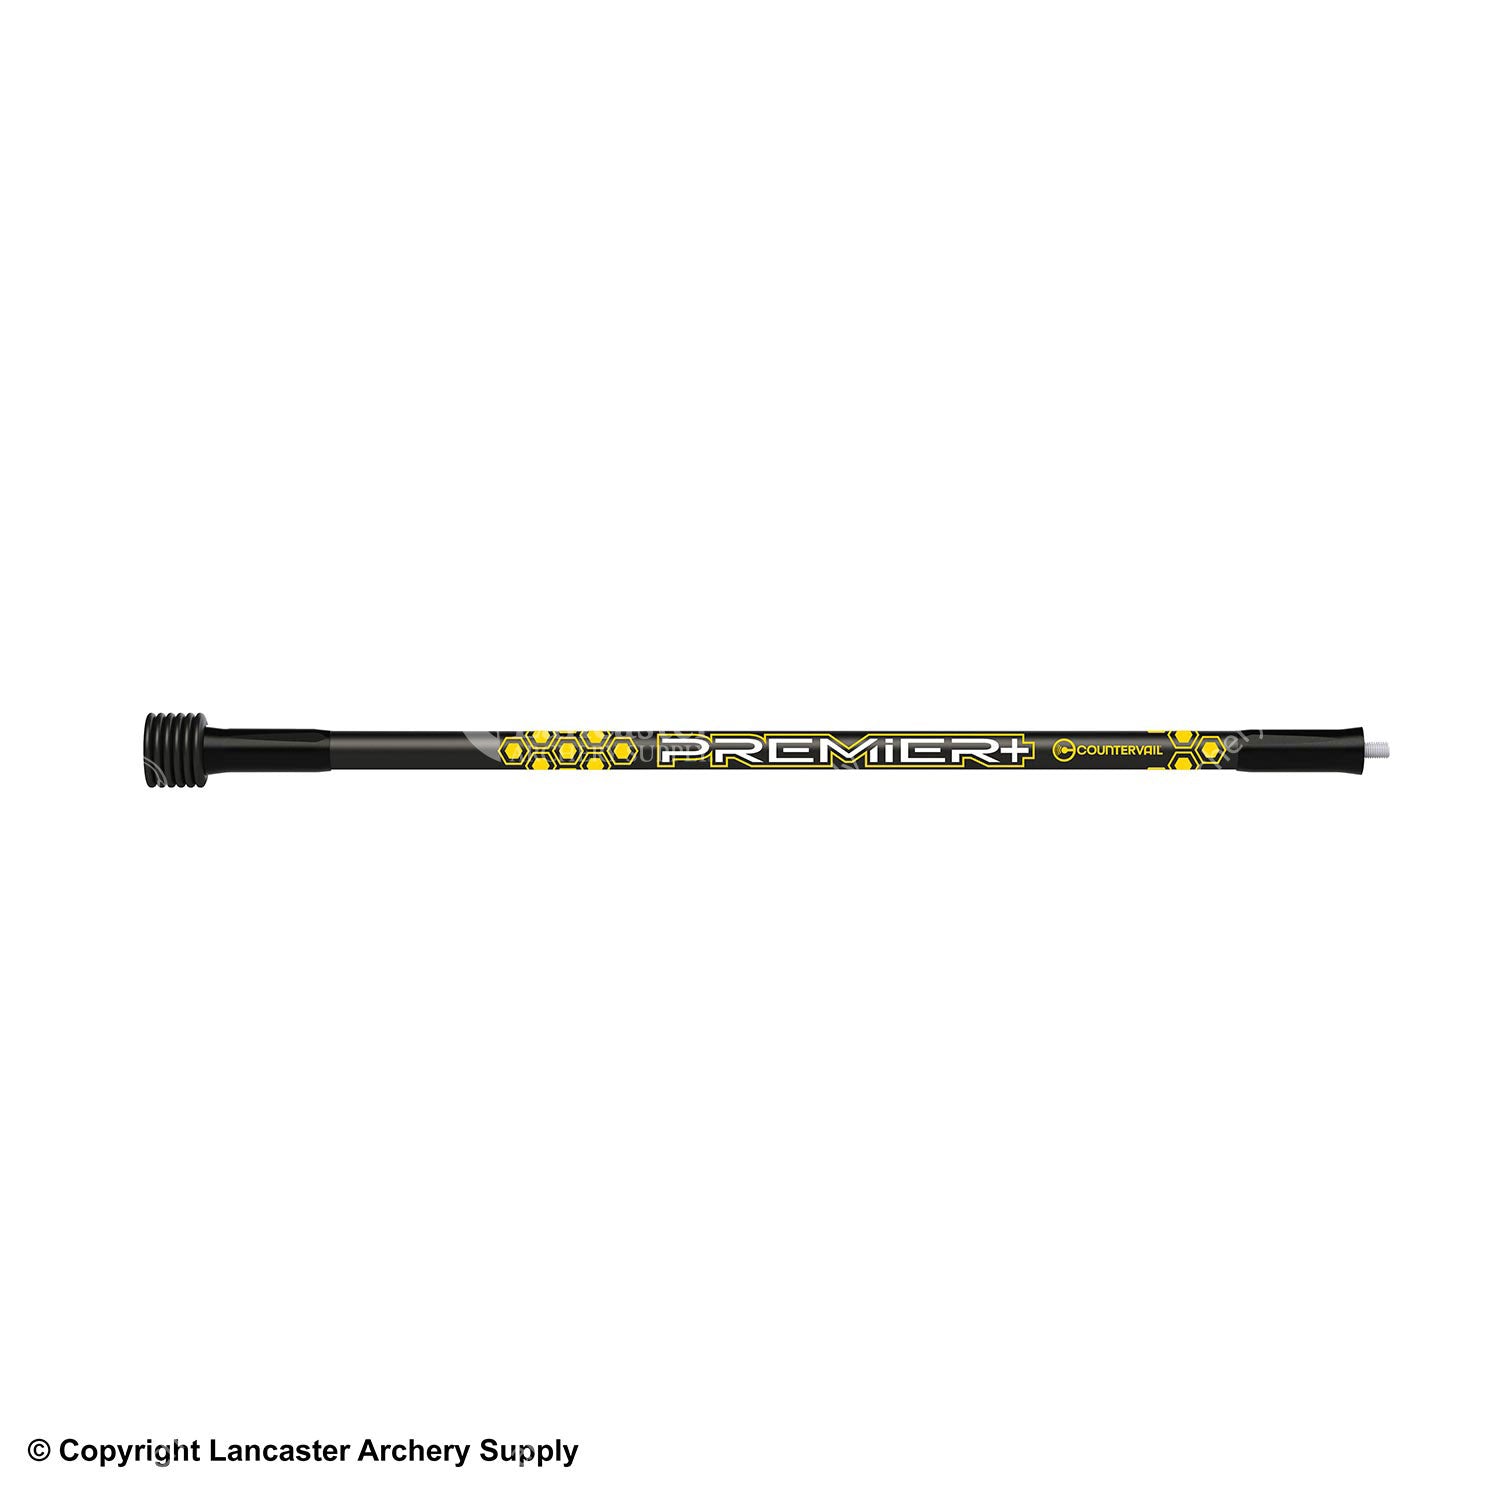 The black Premiere Plus Stabilizer bar with black and yellow honeycomb details on the bar.